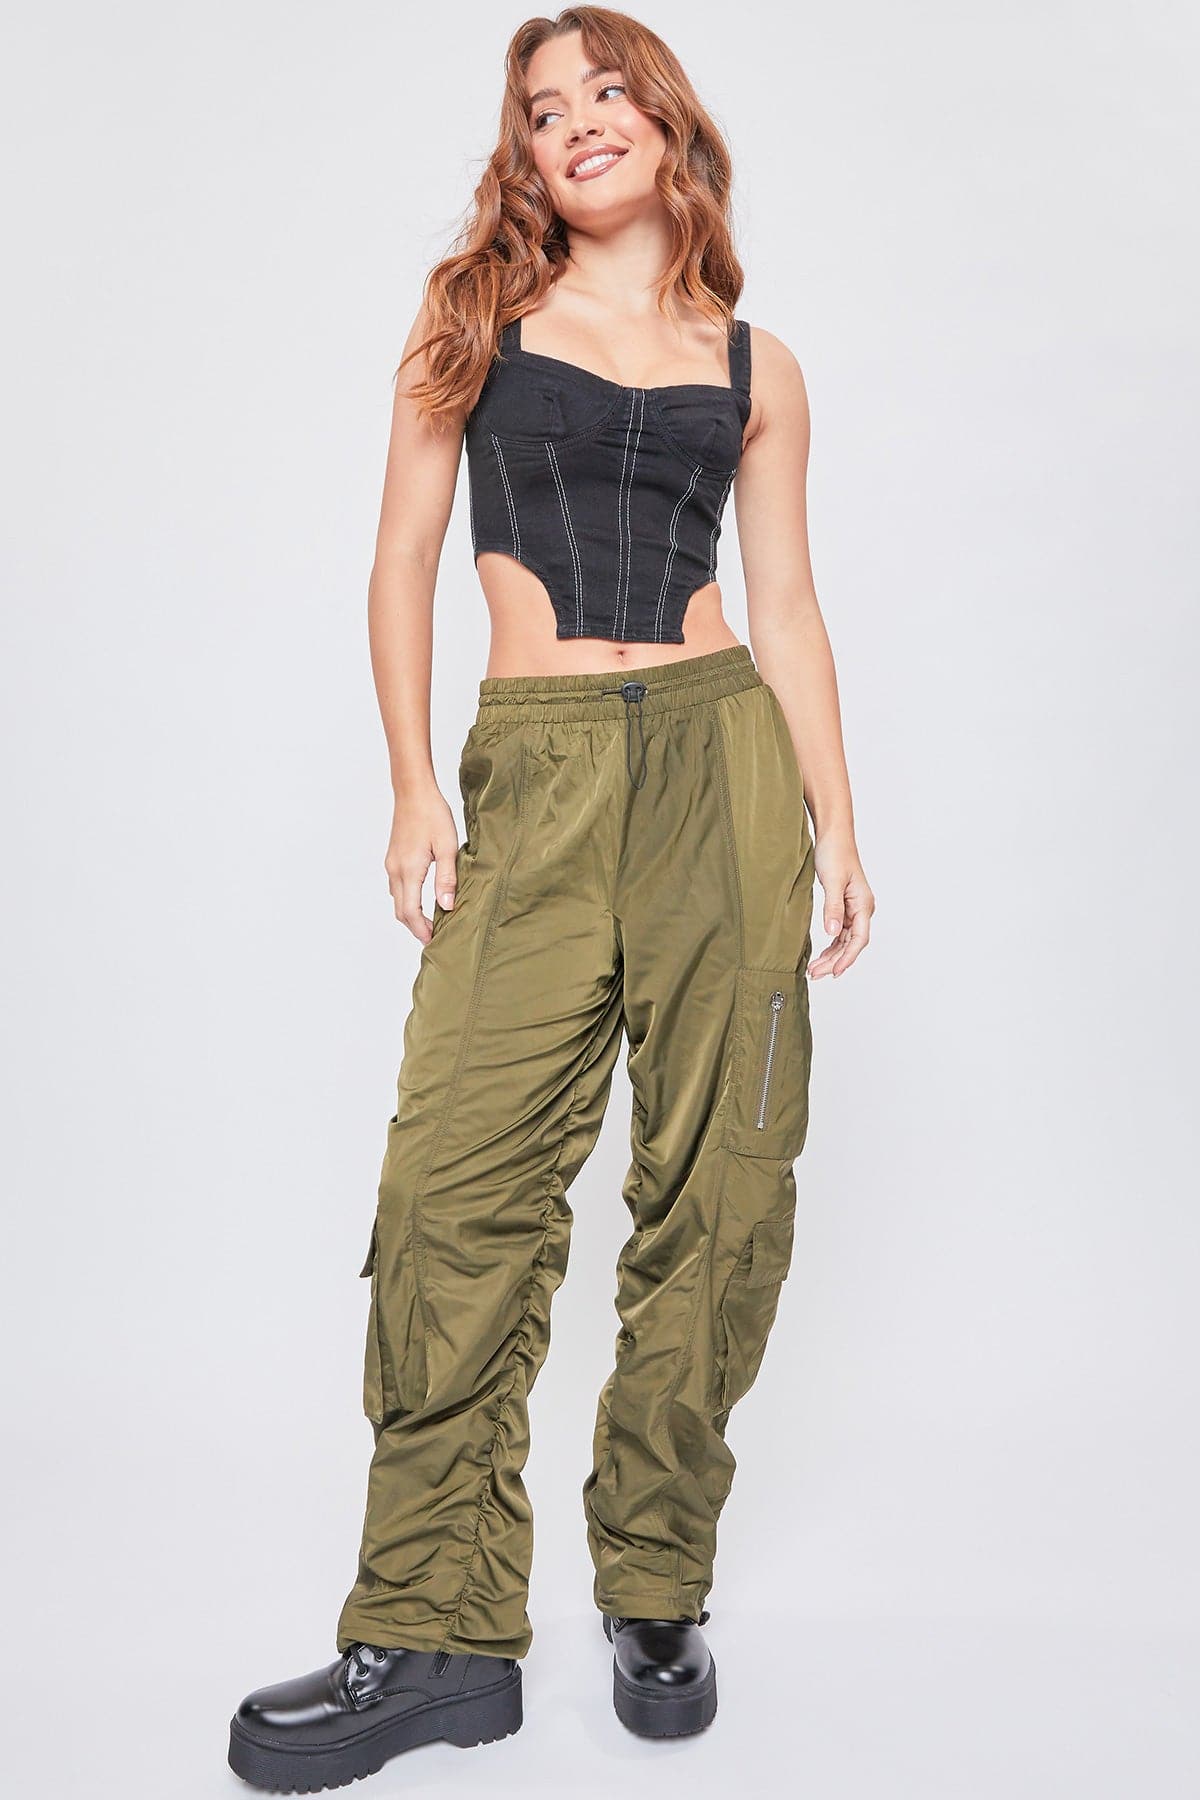 Street Vibes Flap Pockets Drawstring Ruched Parachute Cargo Trousers